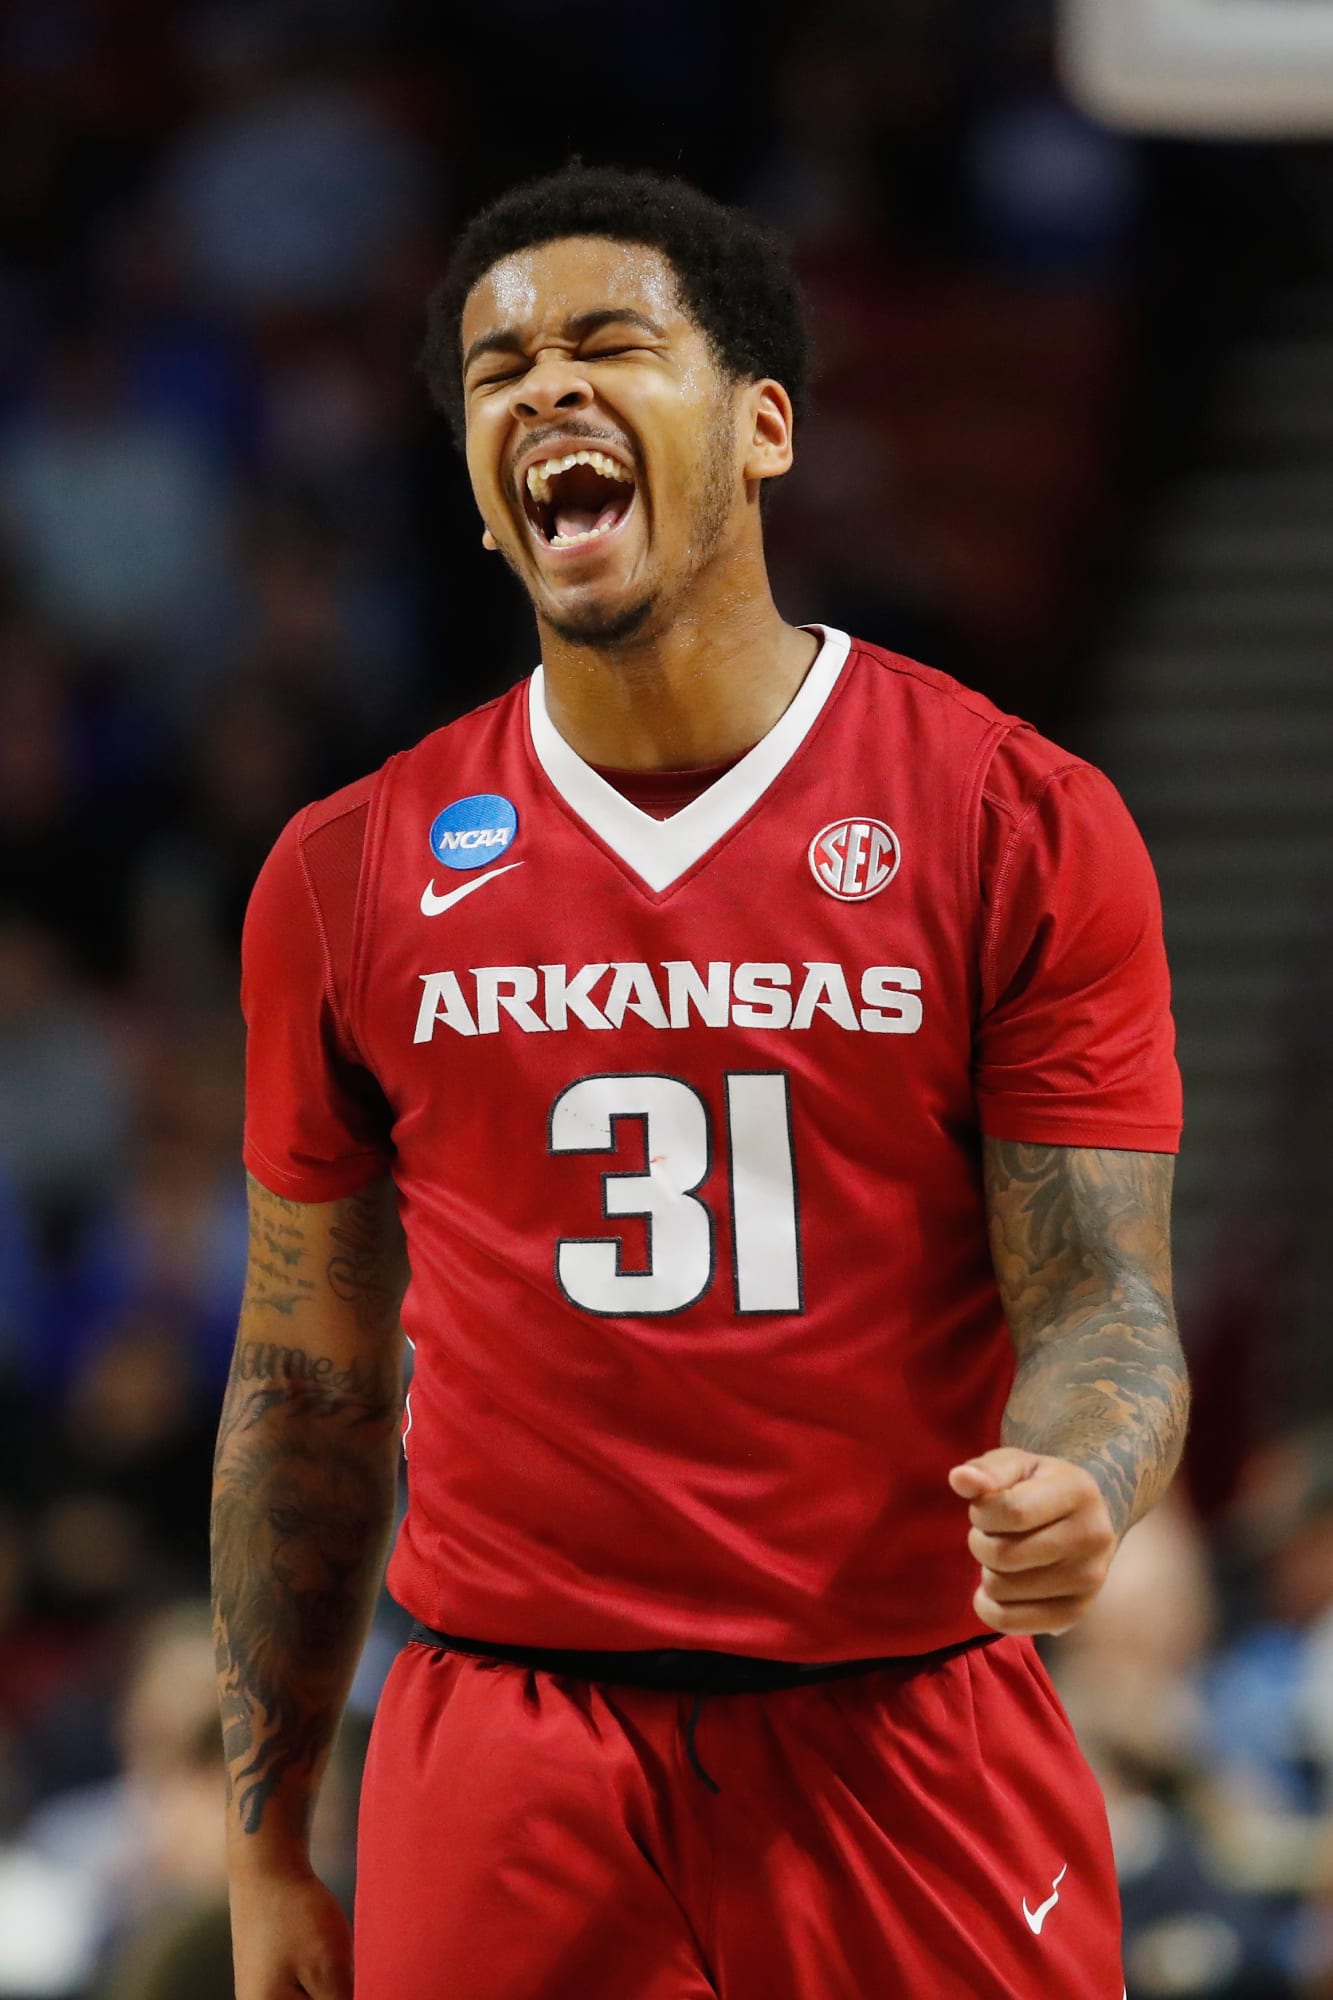 Arkansas Basketball Razorbacks now with top recruiting class in the SEC